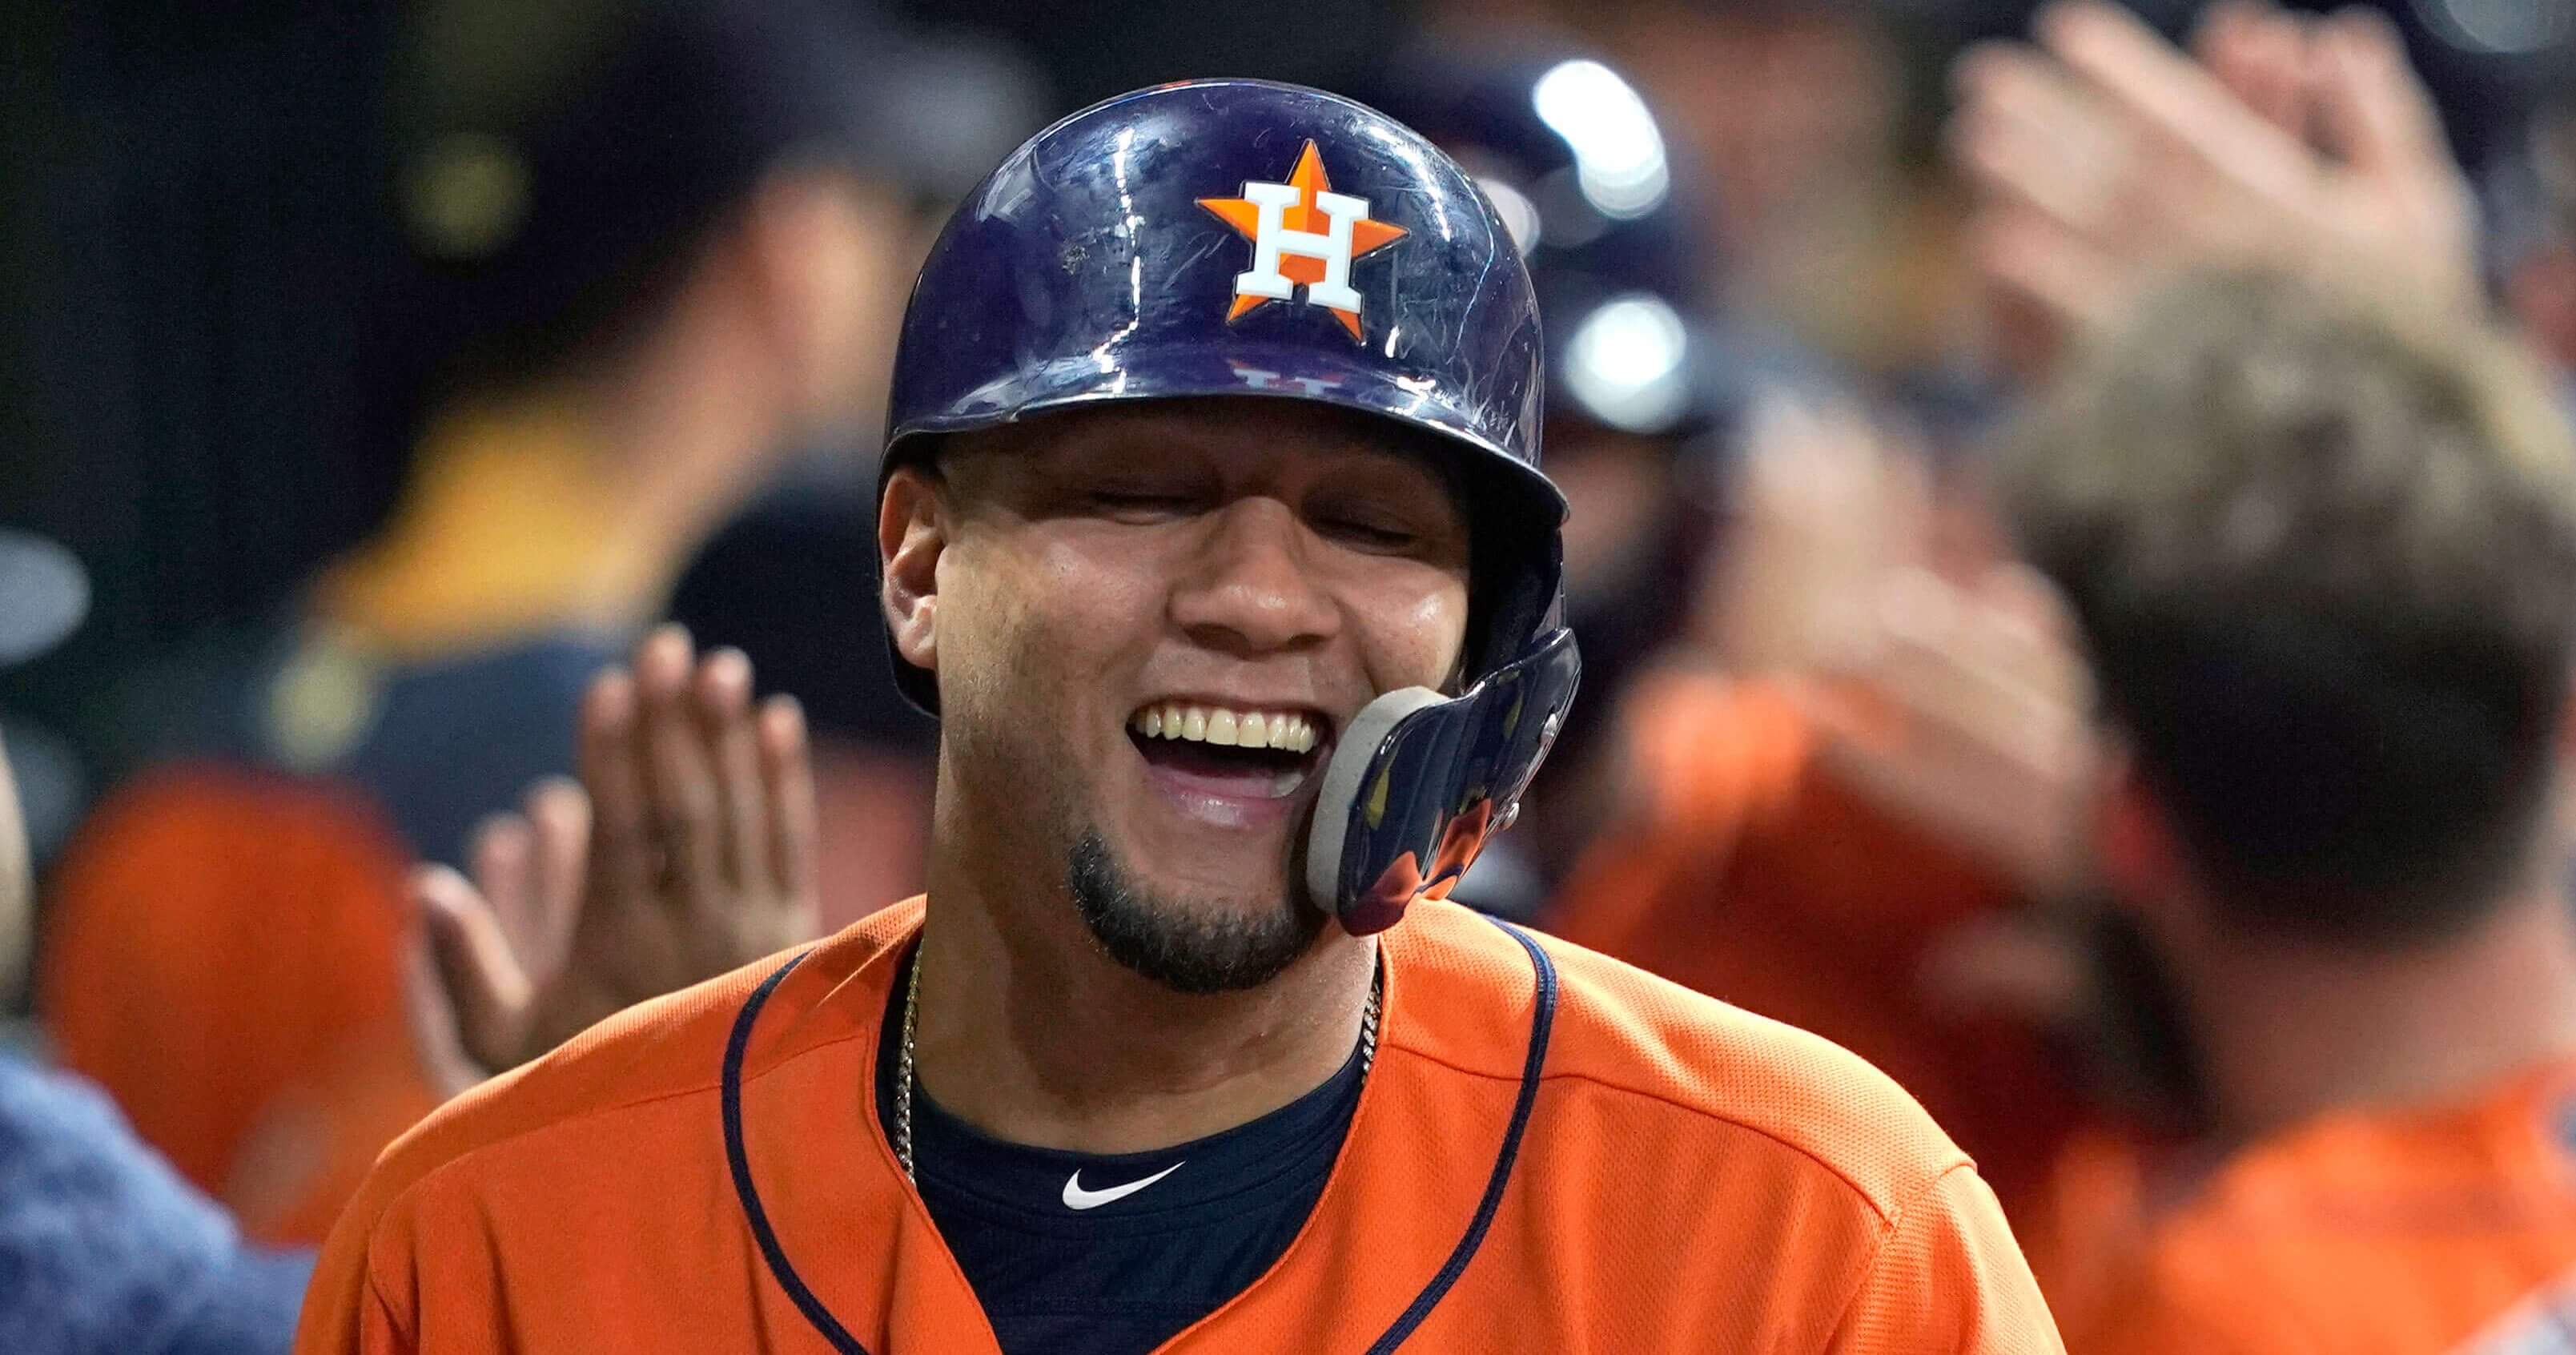 The Astros' Yuli Gurriel celebrates in the dugout after hitting a grand slam against the Los Angeles Angels during the first inning Friday in Houston.